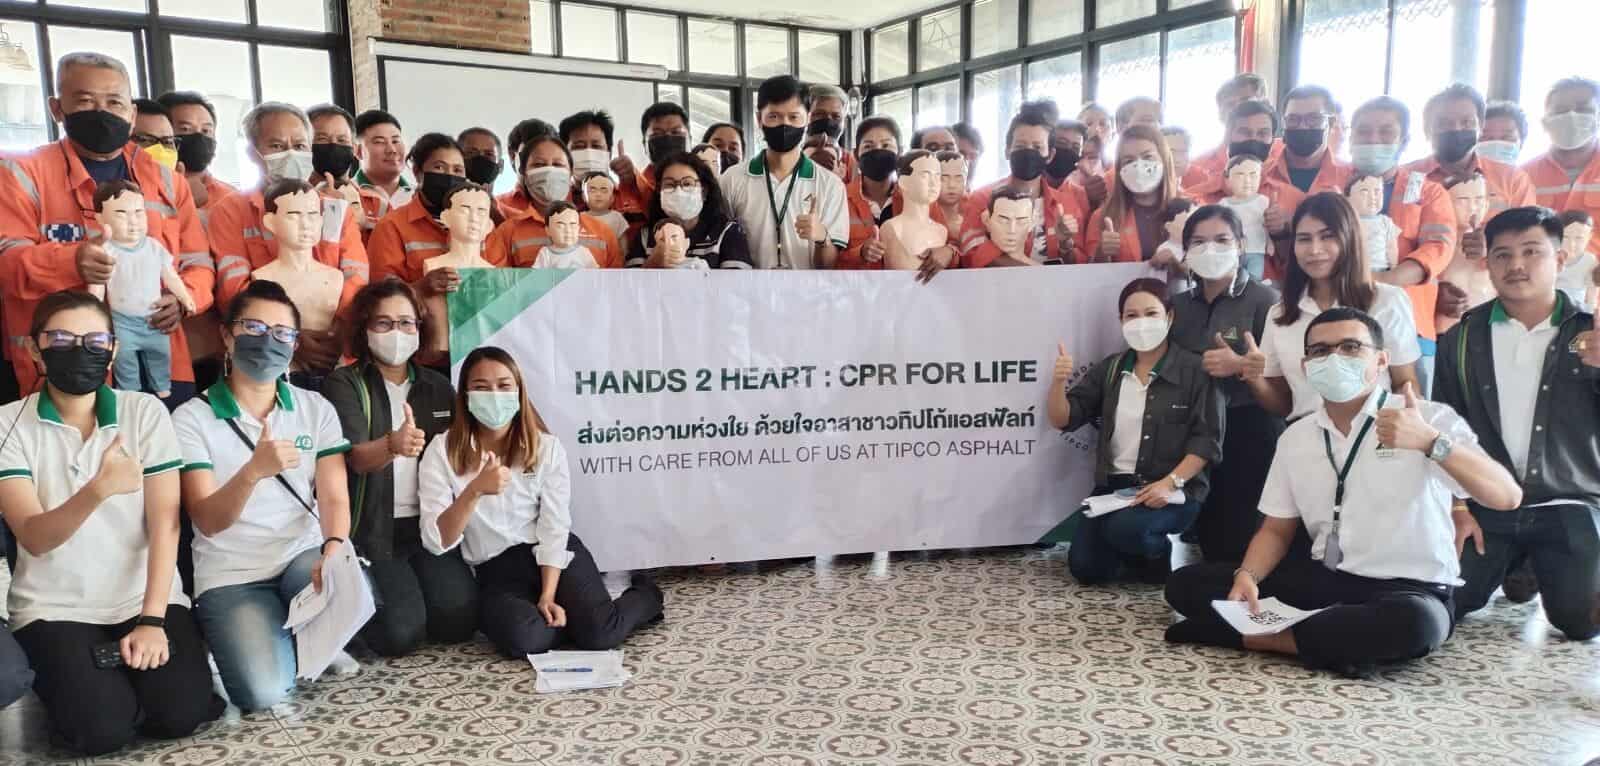 Hands 2 Heart-CPR for Life